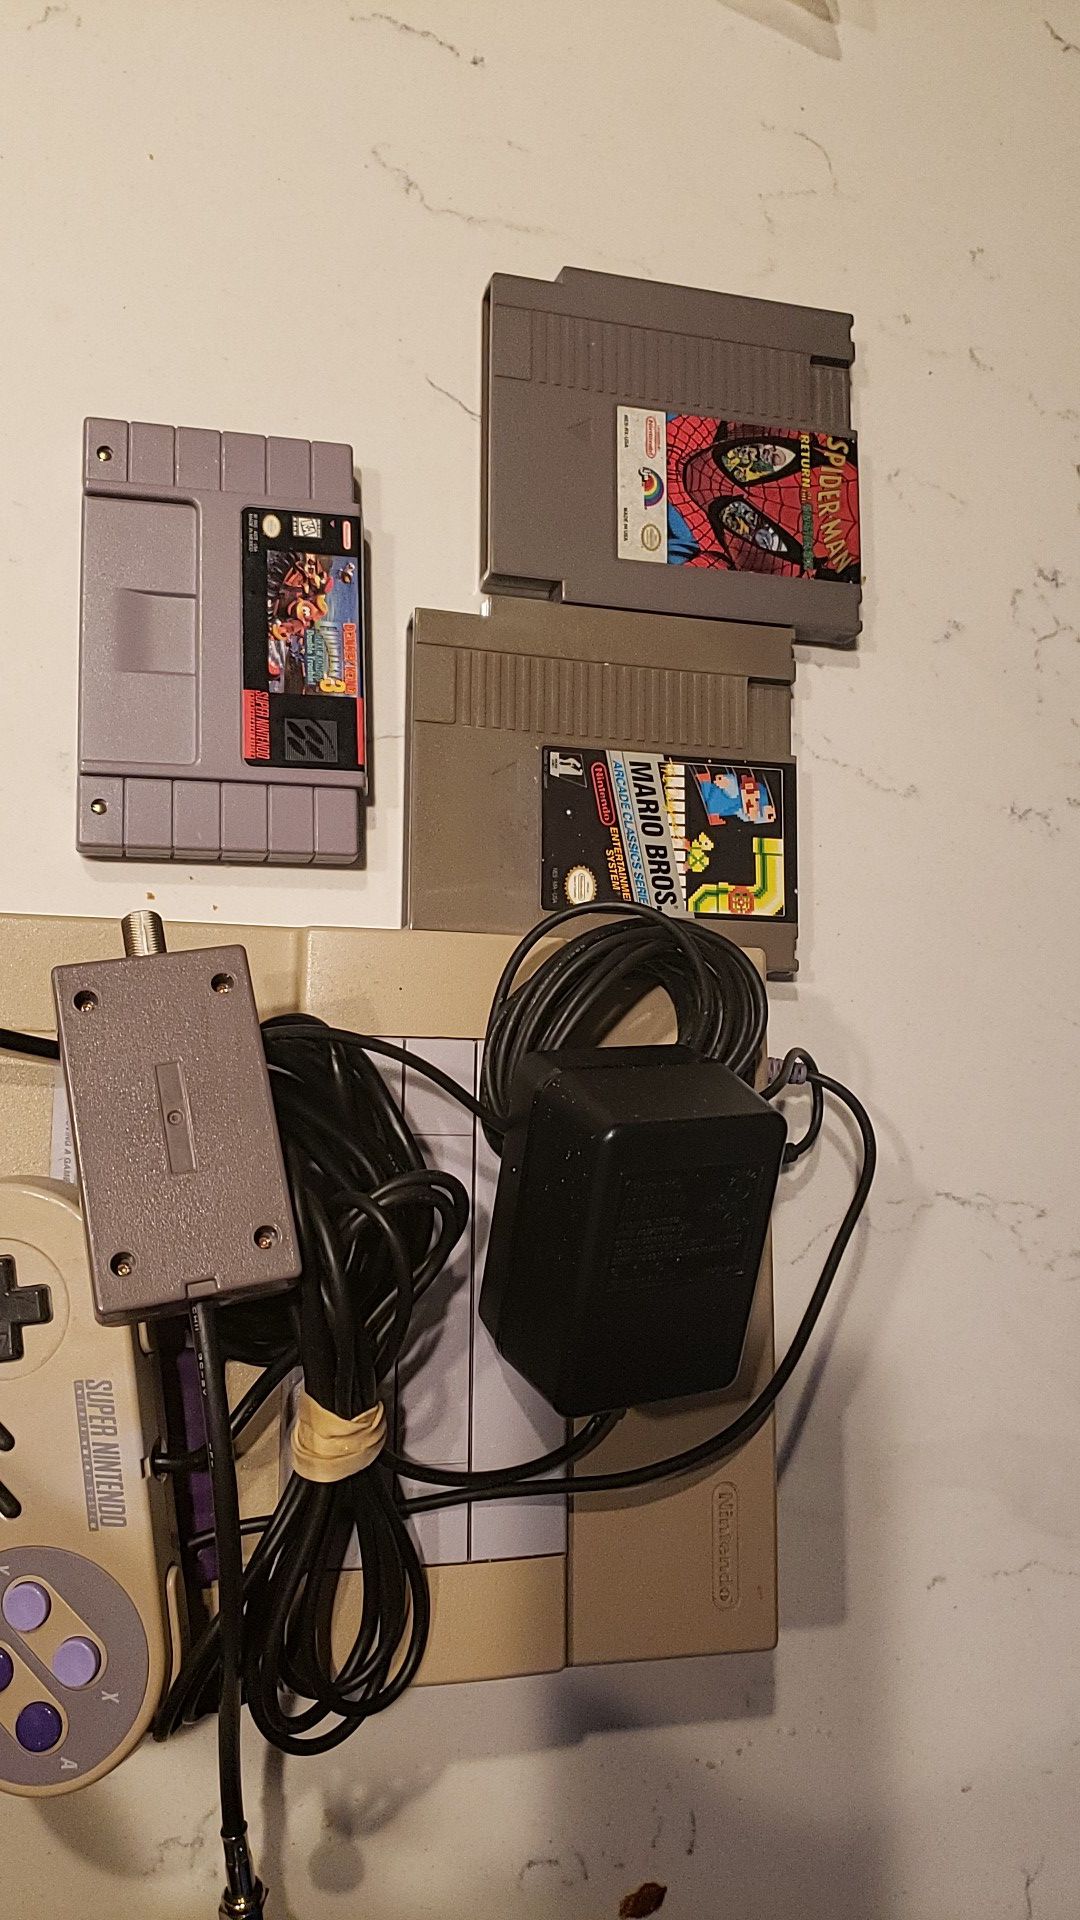 Super nintendo console and games